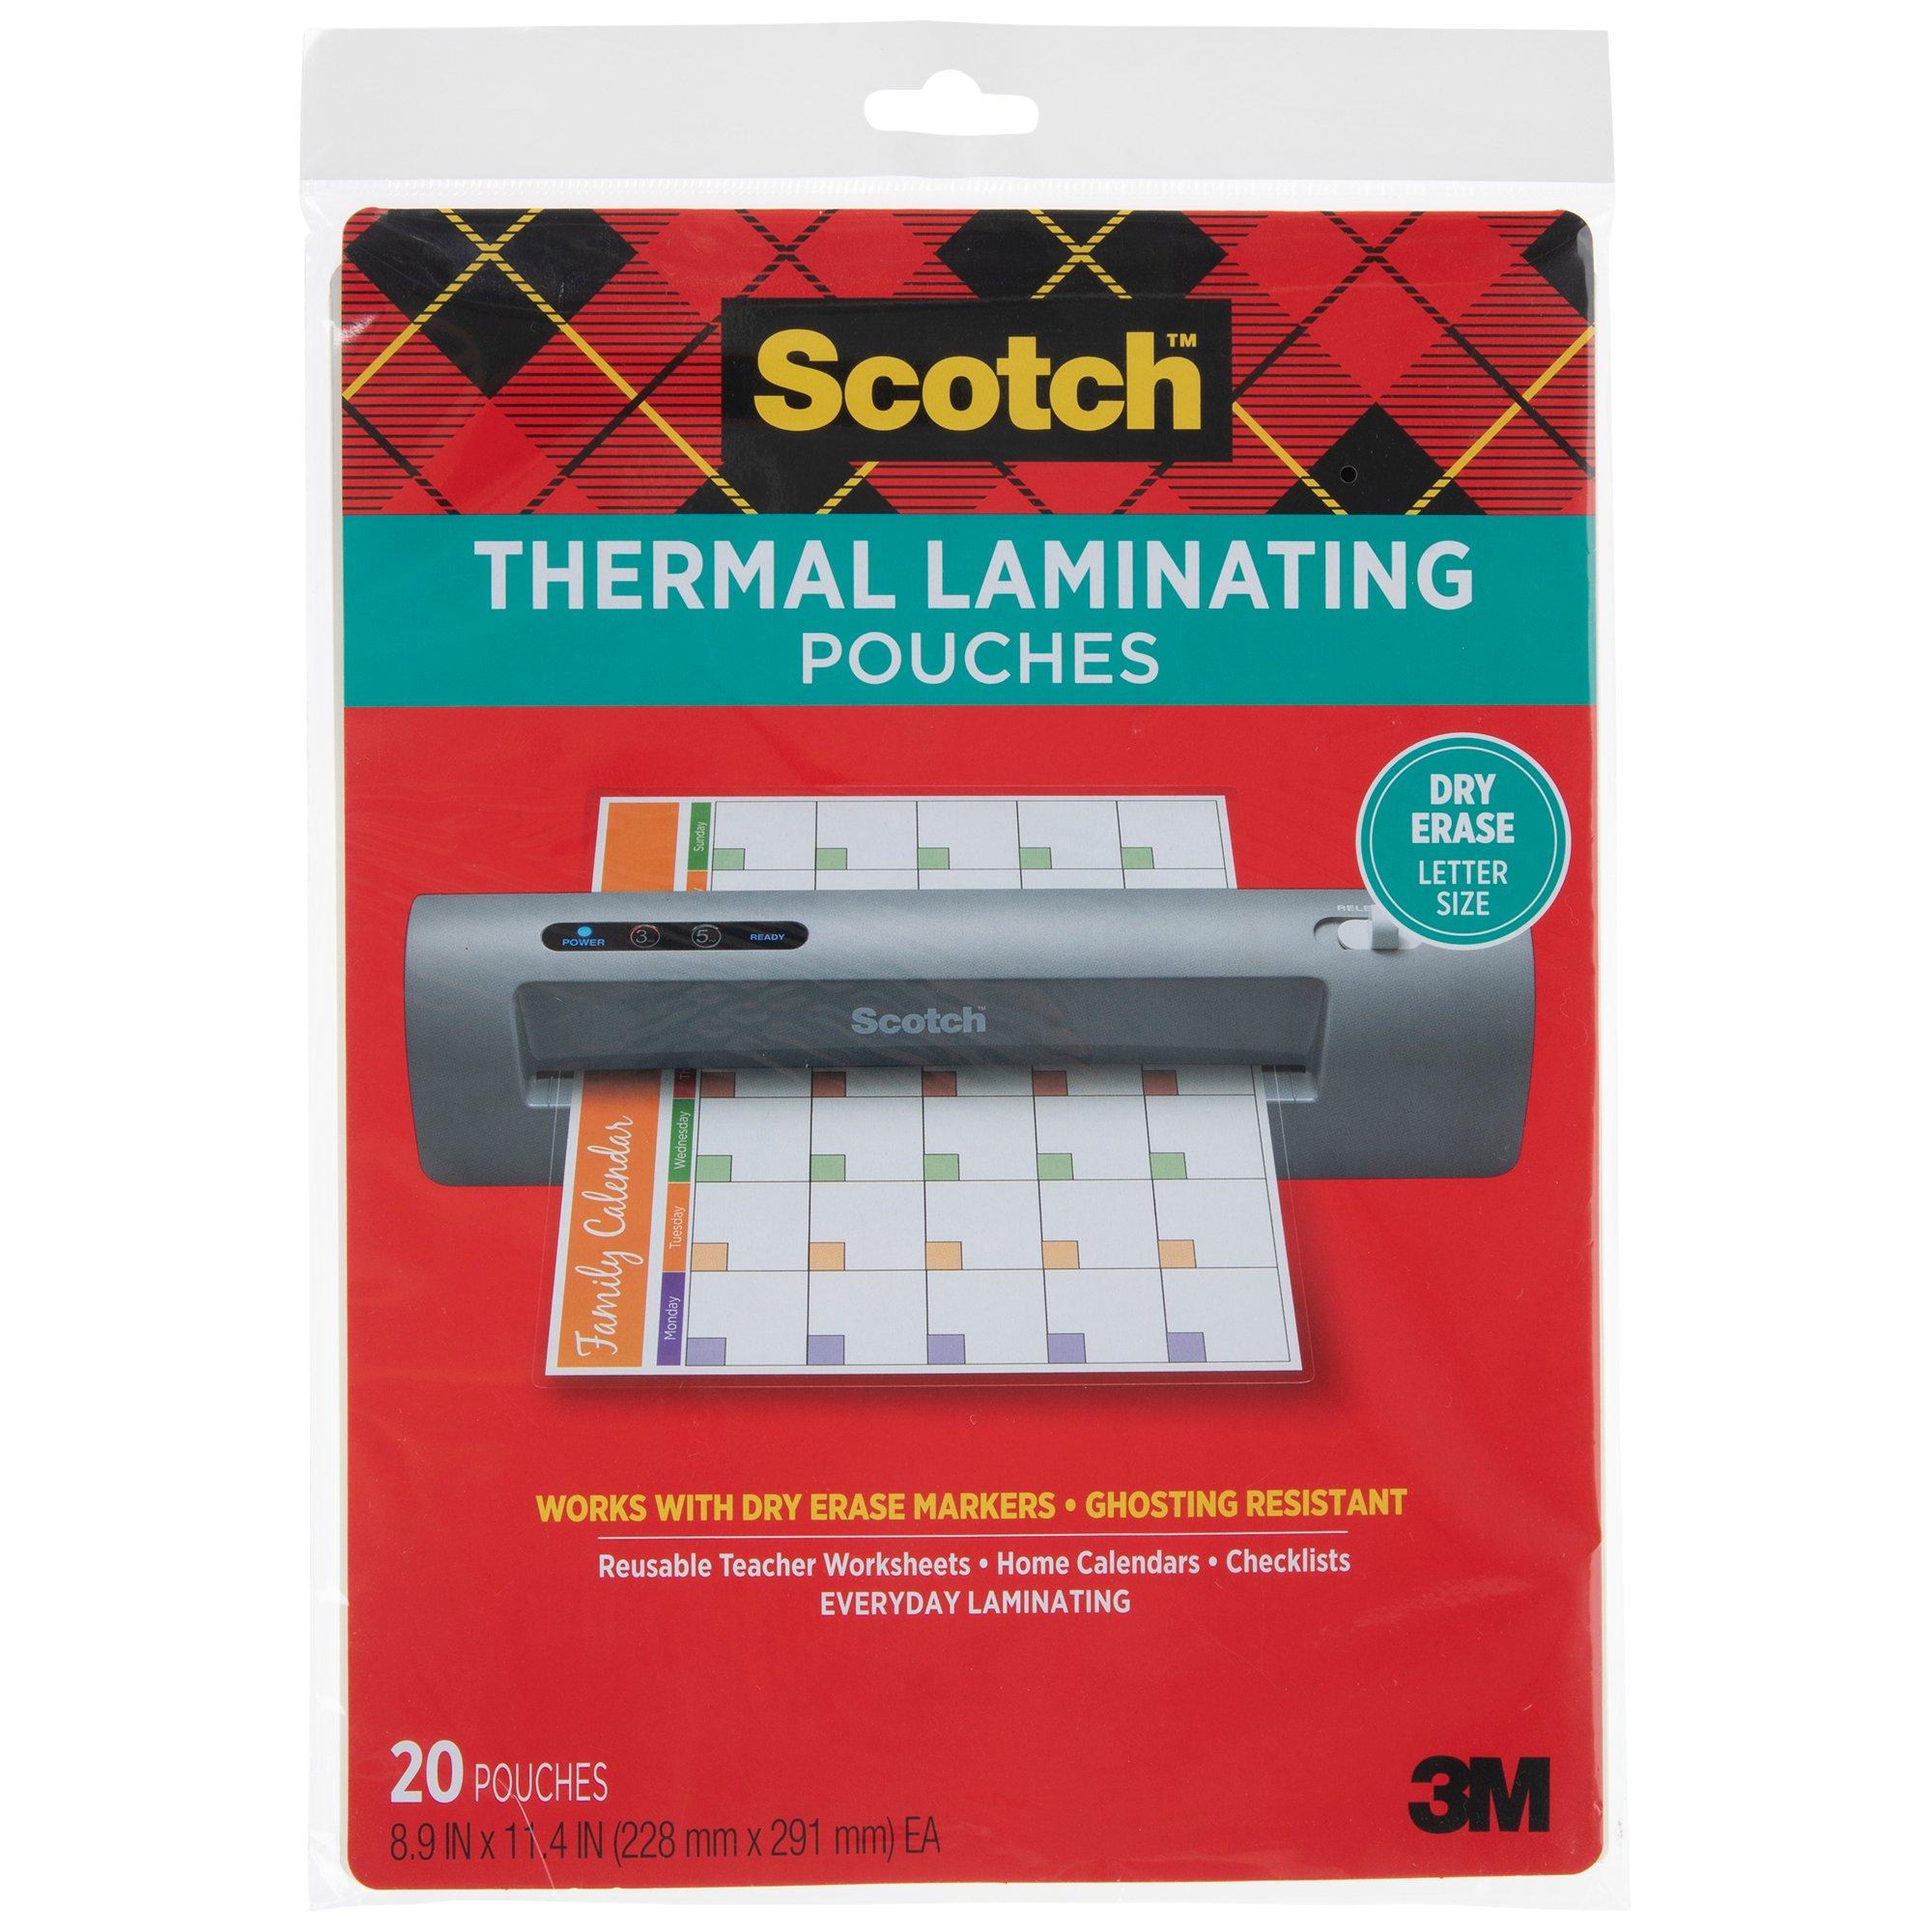 Scotch Thermal Laminating Pouches Hobby Lobby 2269520 